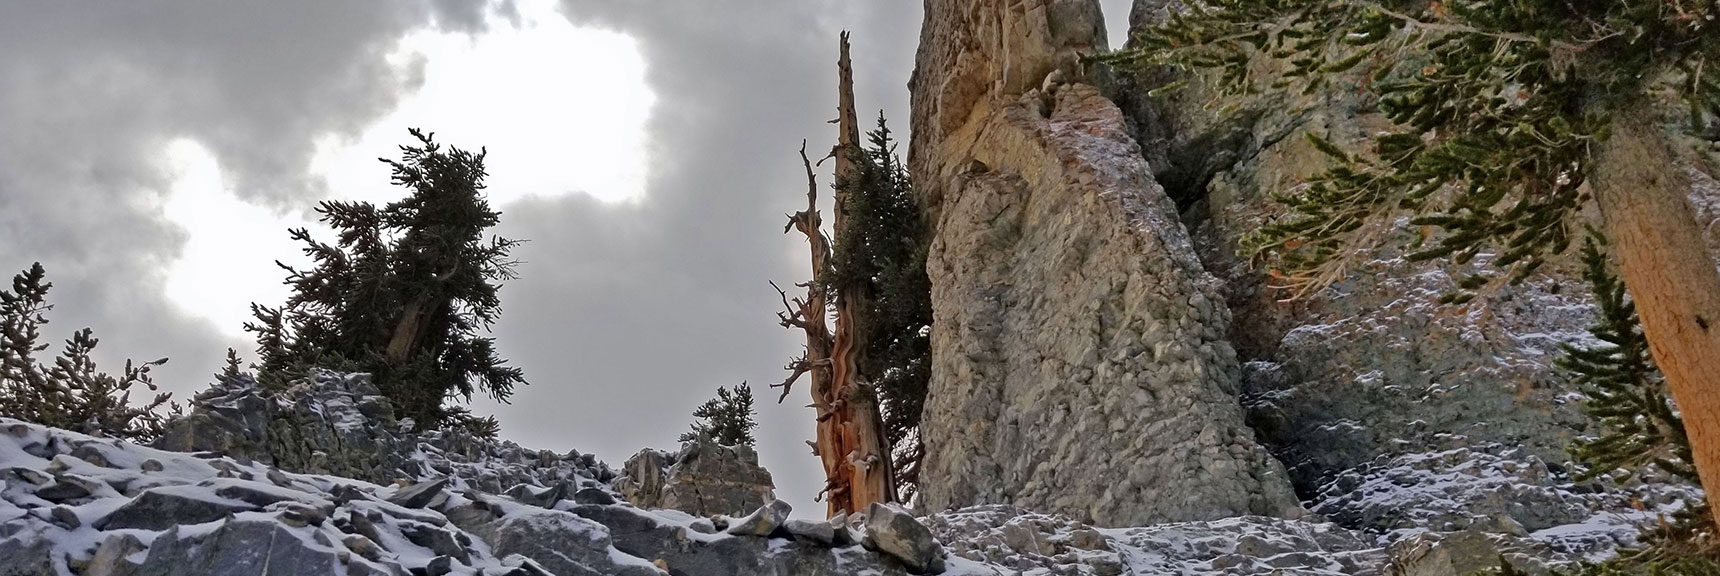 Rounding One of Many Cliff Sections - Rock, Tree and Stone are Incredible! | Charleston Peak Loop October Snow Dusting | Mt. Charleston Wilderness | Spring Mountains, Nevada